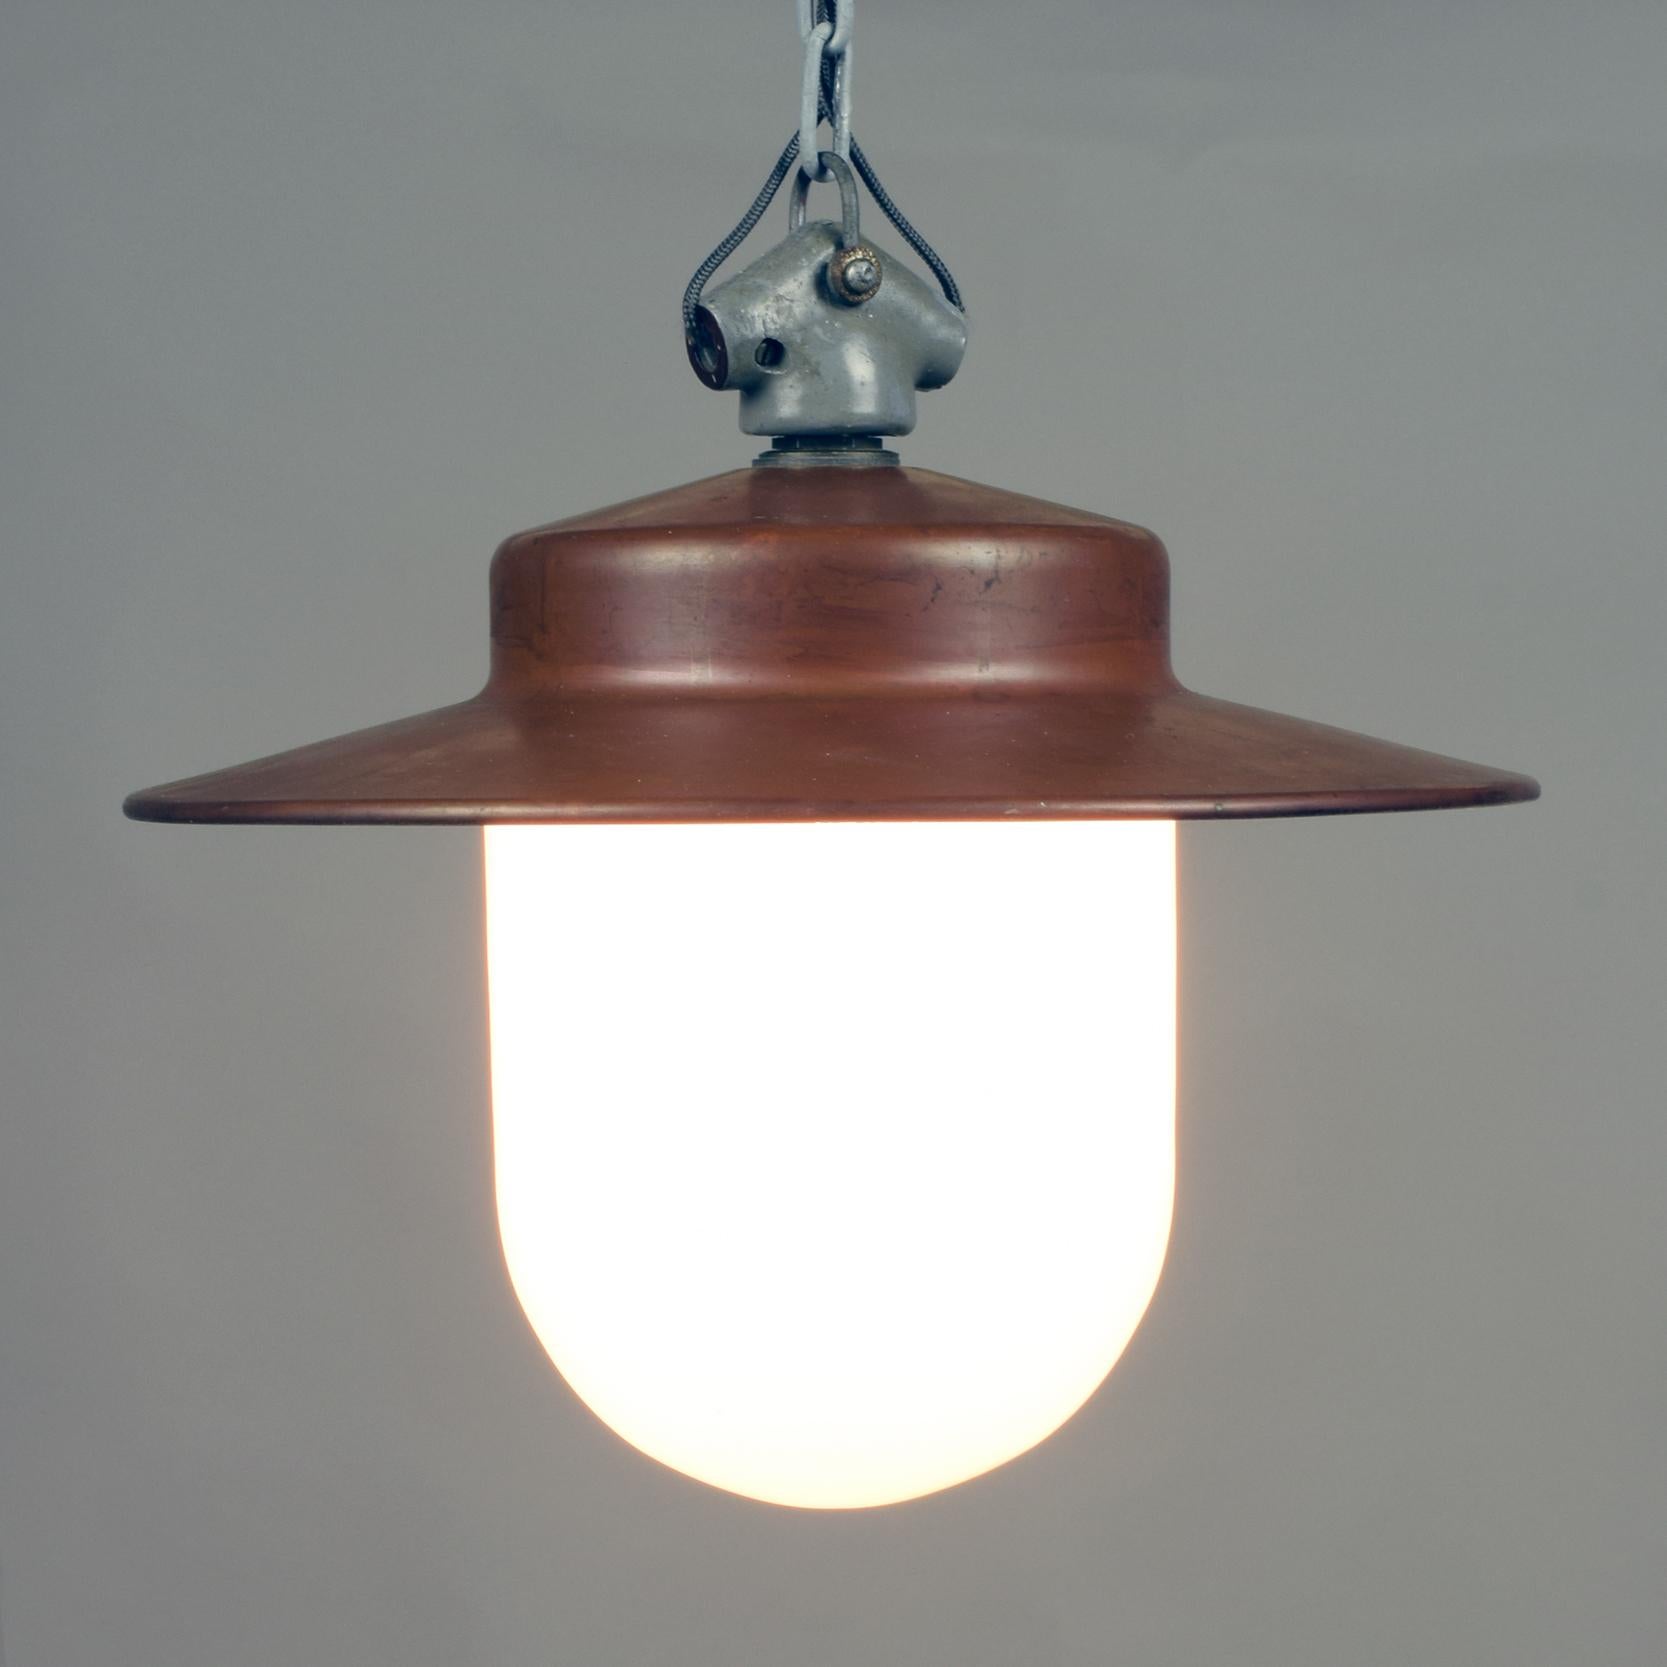 Molded B.A.G. Turgi Industrial 1930s Bauhaus Pendant Lamp Attributed to Hin Bredendieck For Sale